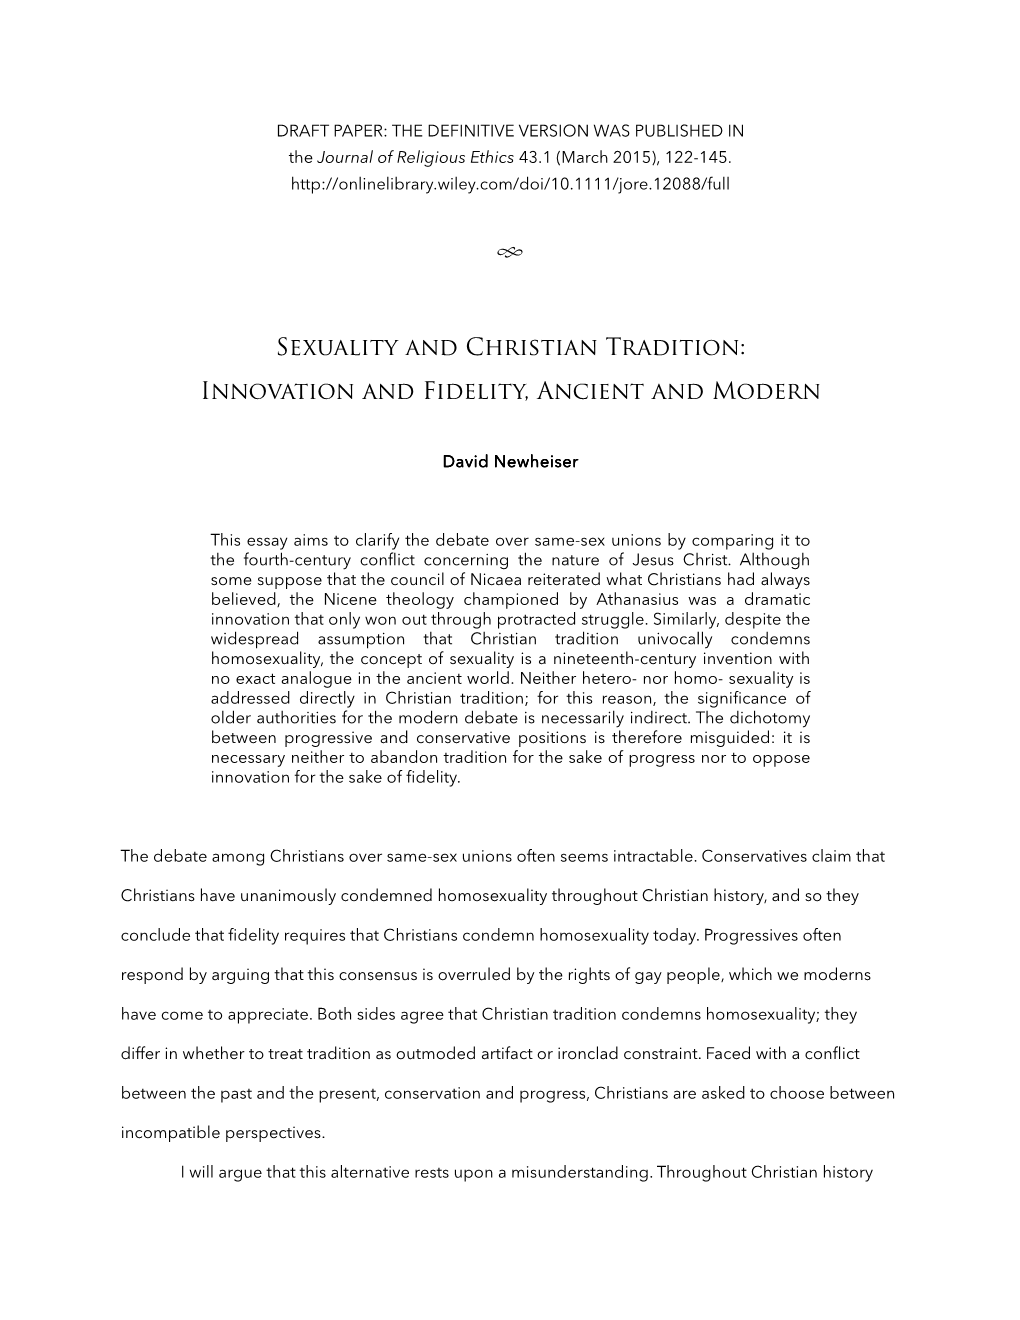 Sexuality and Christian Tradition: Innovation and Fidelity, Ancient and Modern